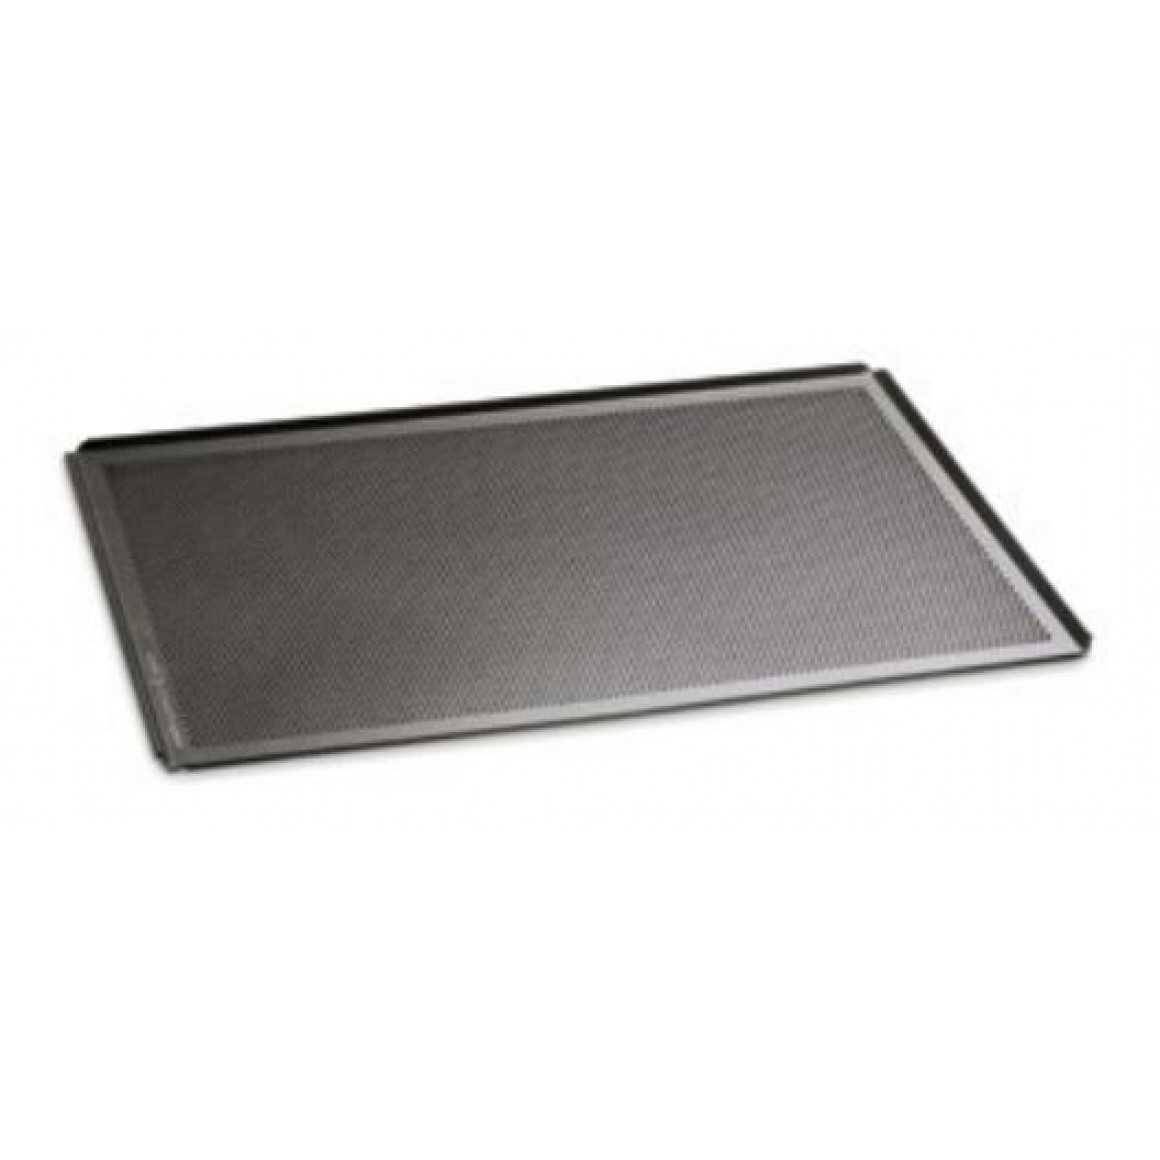 Baking tray, perforated, non-stick coating 2/3 GN